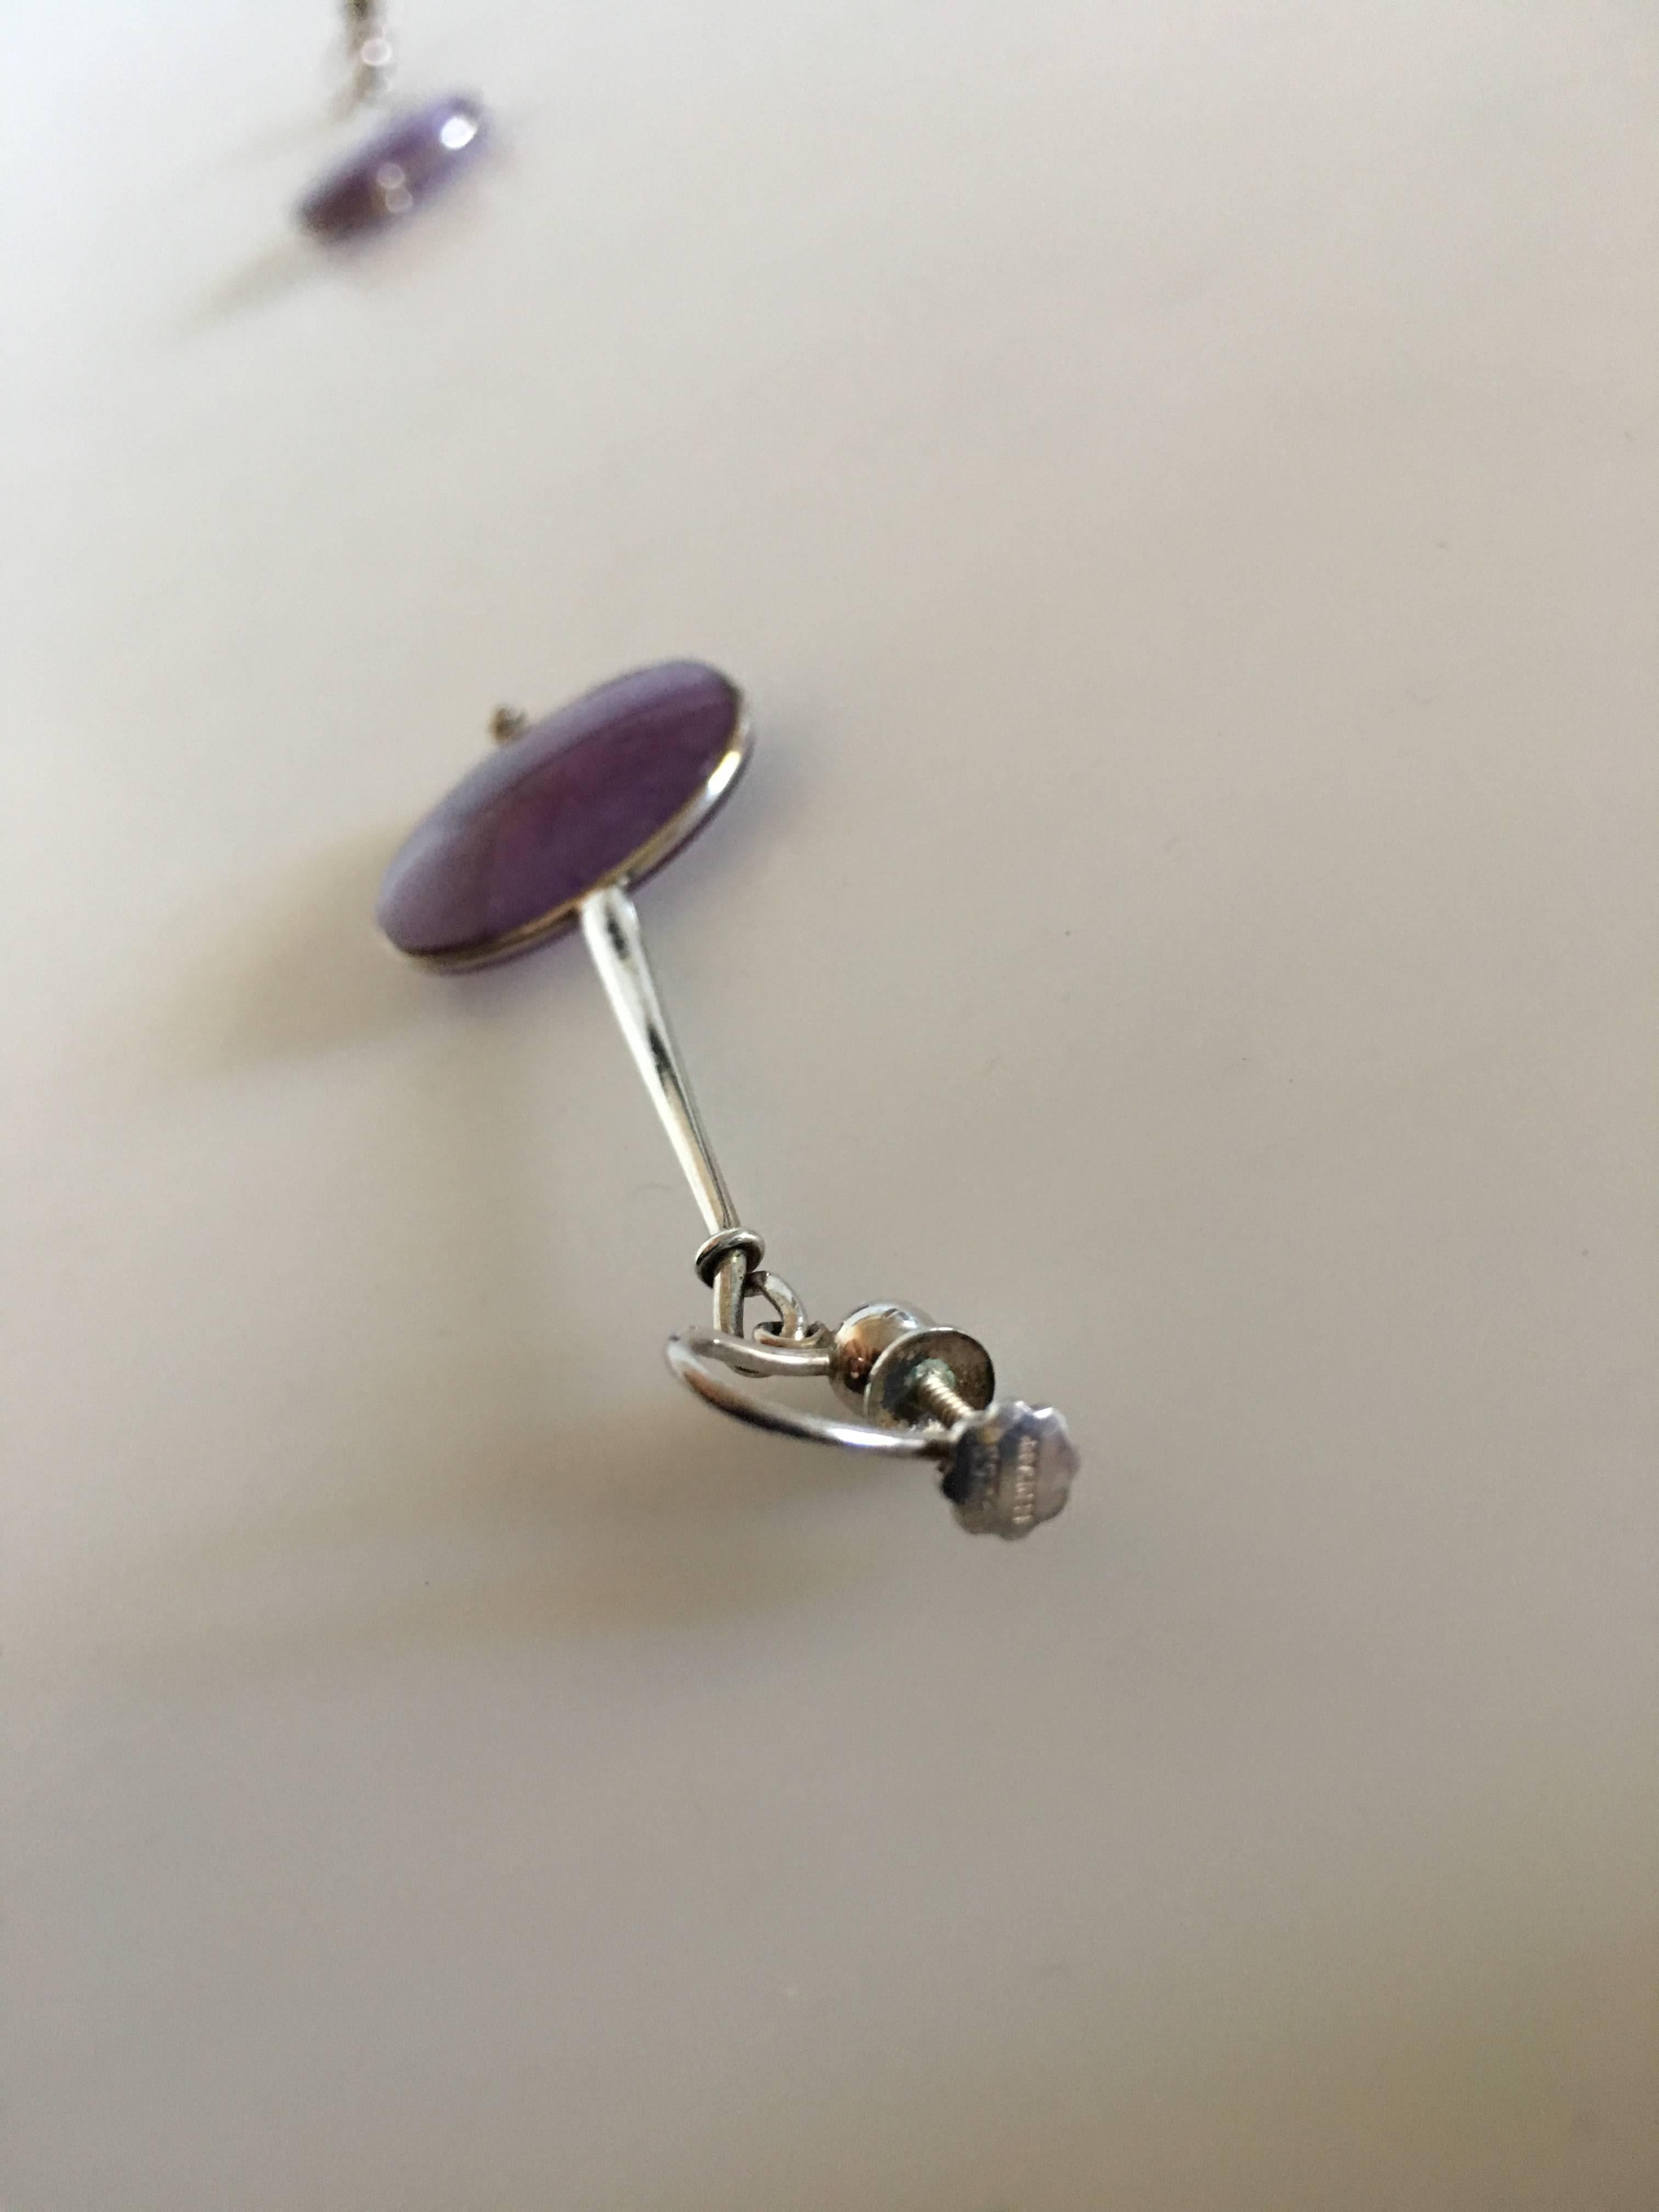 Georg Jensen Sterling Silver Torun Earrings No. 245 with Amethyst. Measures 6 cm L. 2.5 cm dia. Weighs a combined 12 grams.